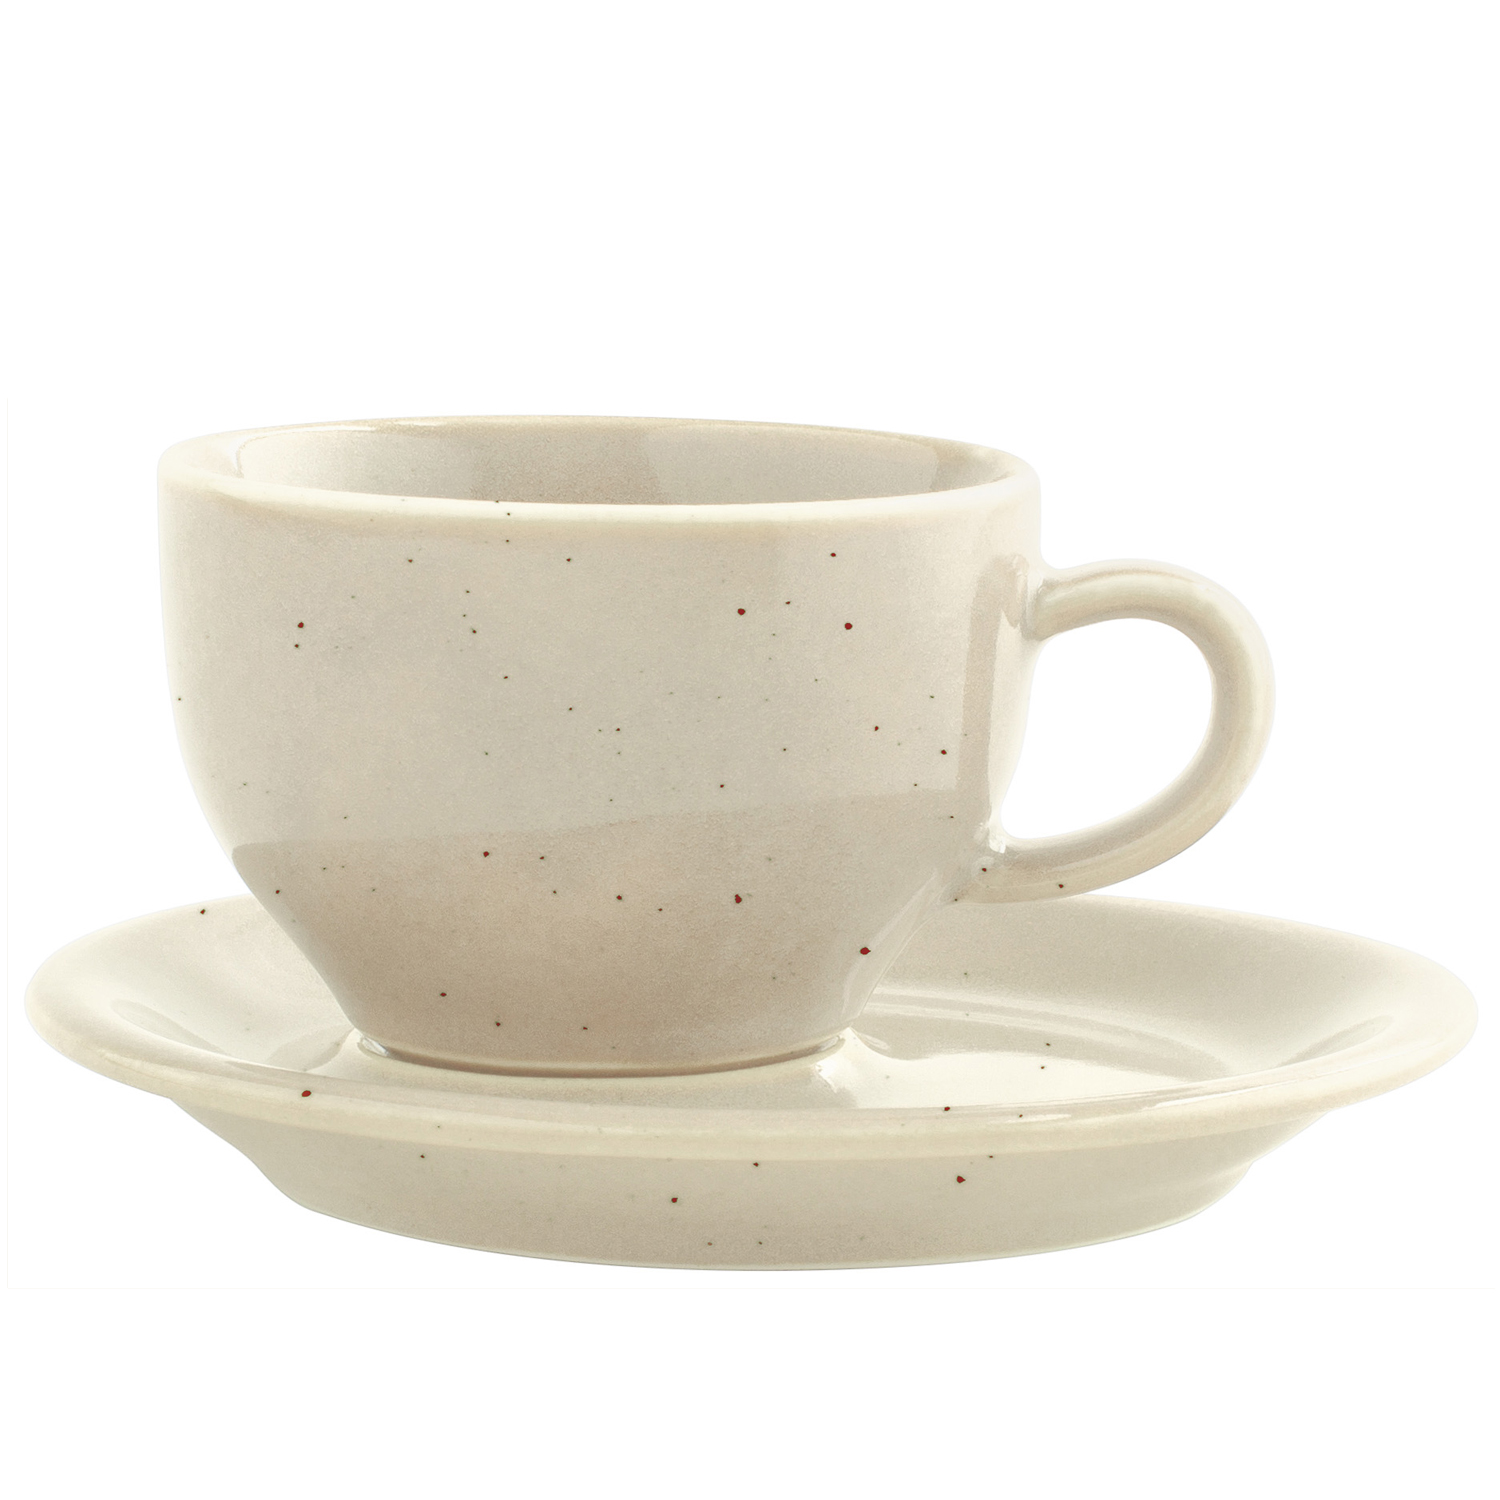 KAHLA Cappuccino International-Tasse Homestyle natural cotton 0,23l 